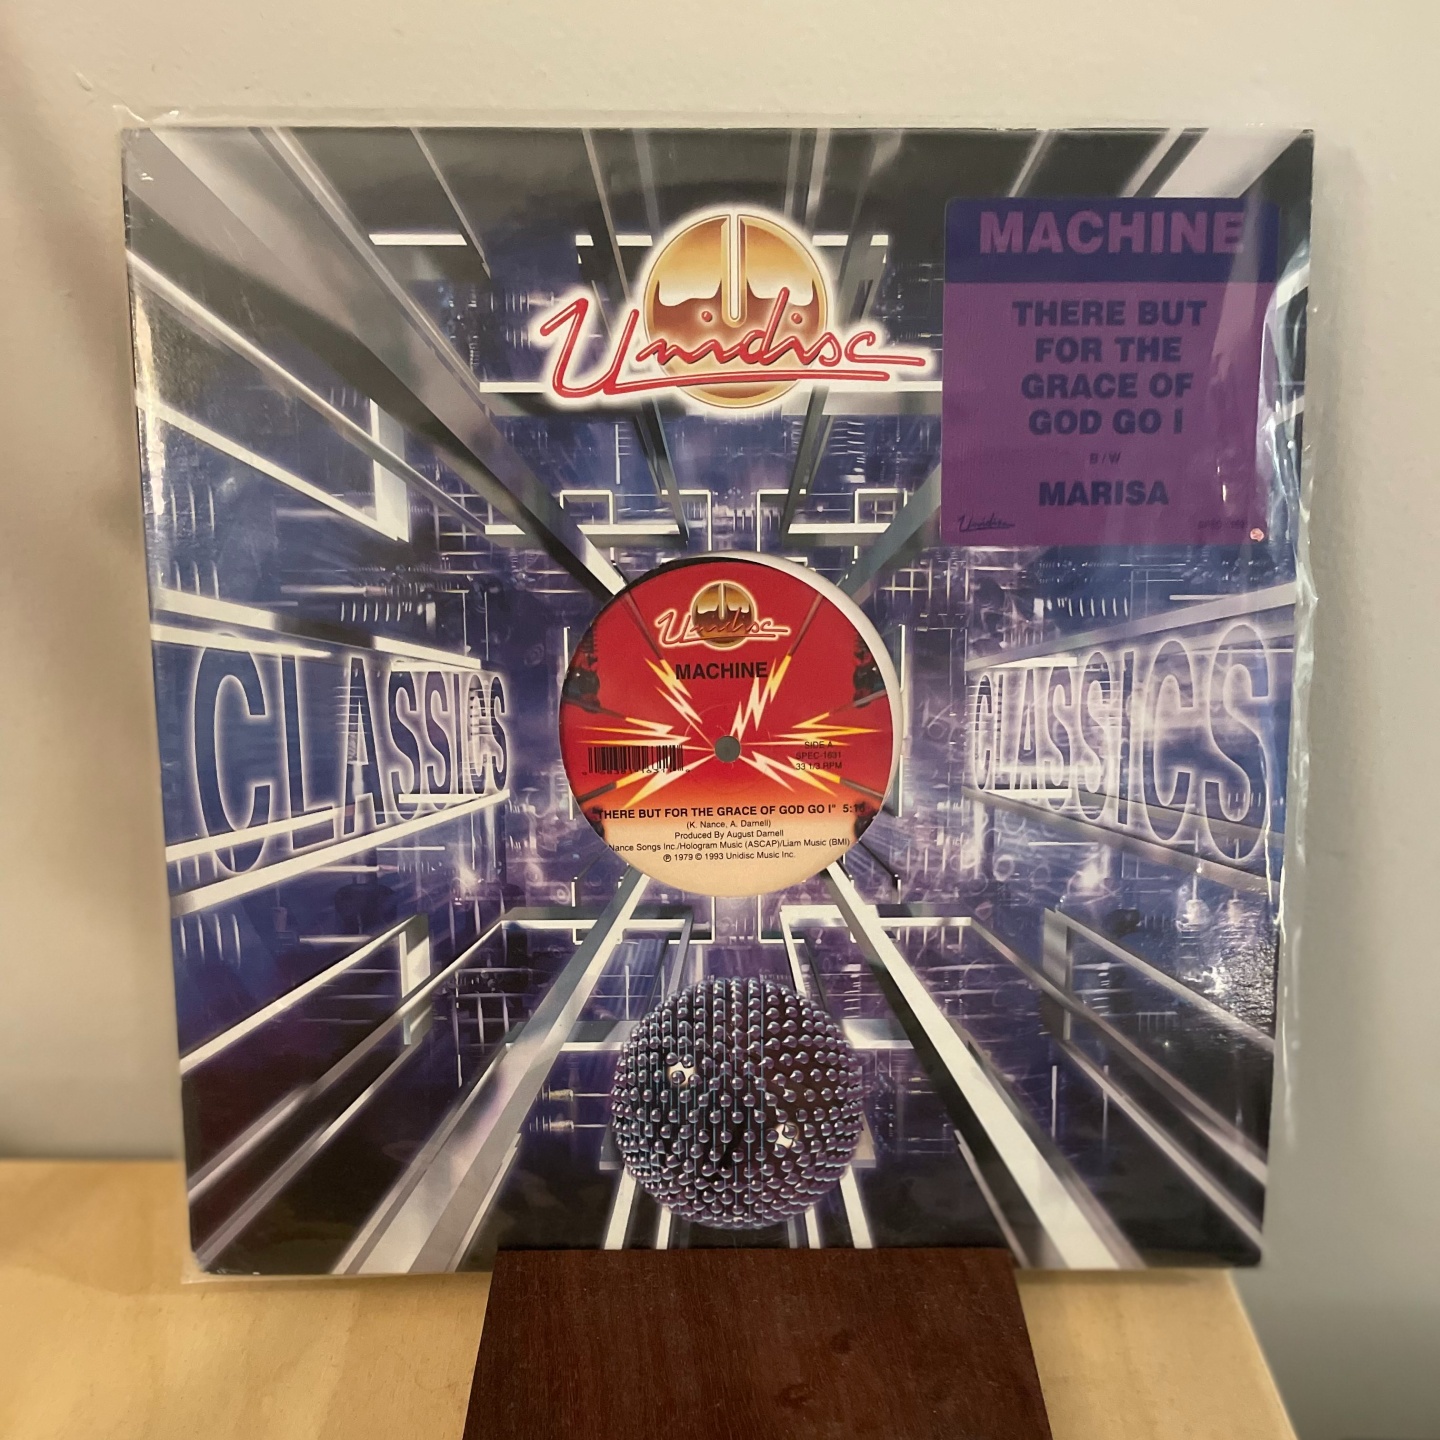 Machine - "There But For the Grace of God Go I" vinyl